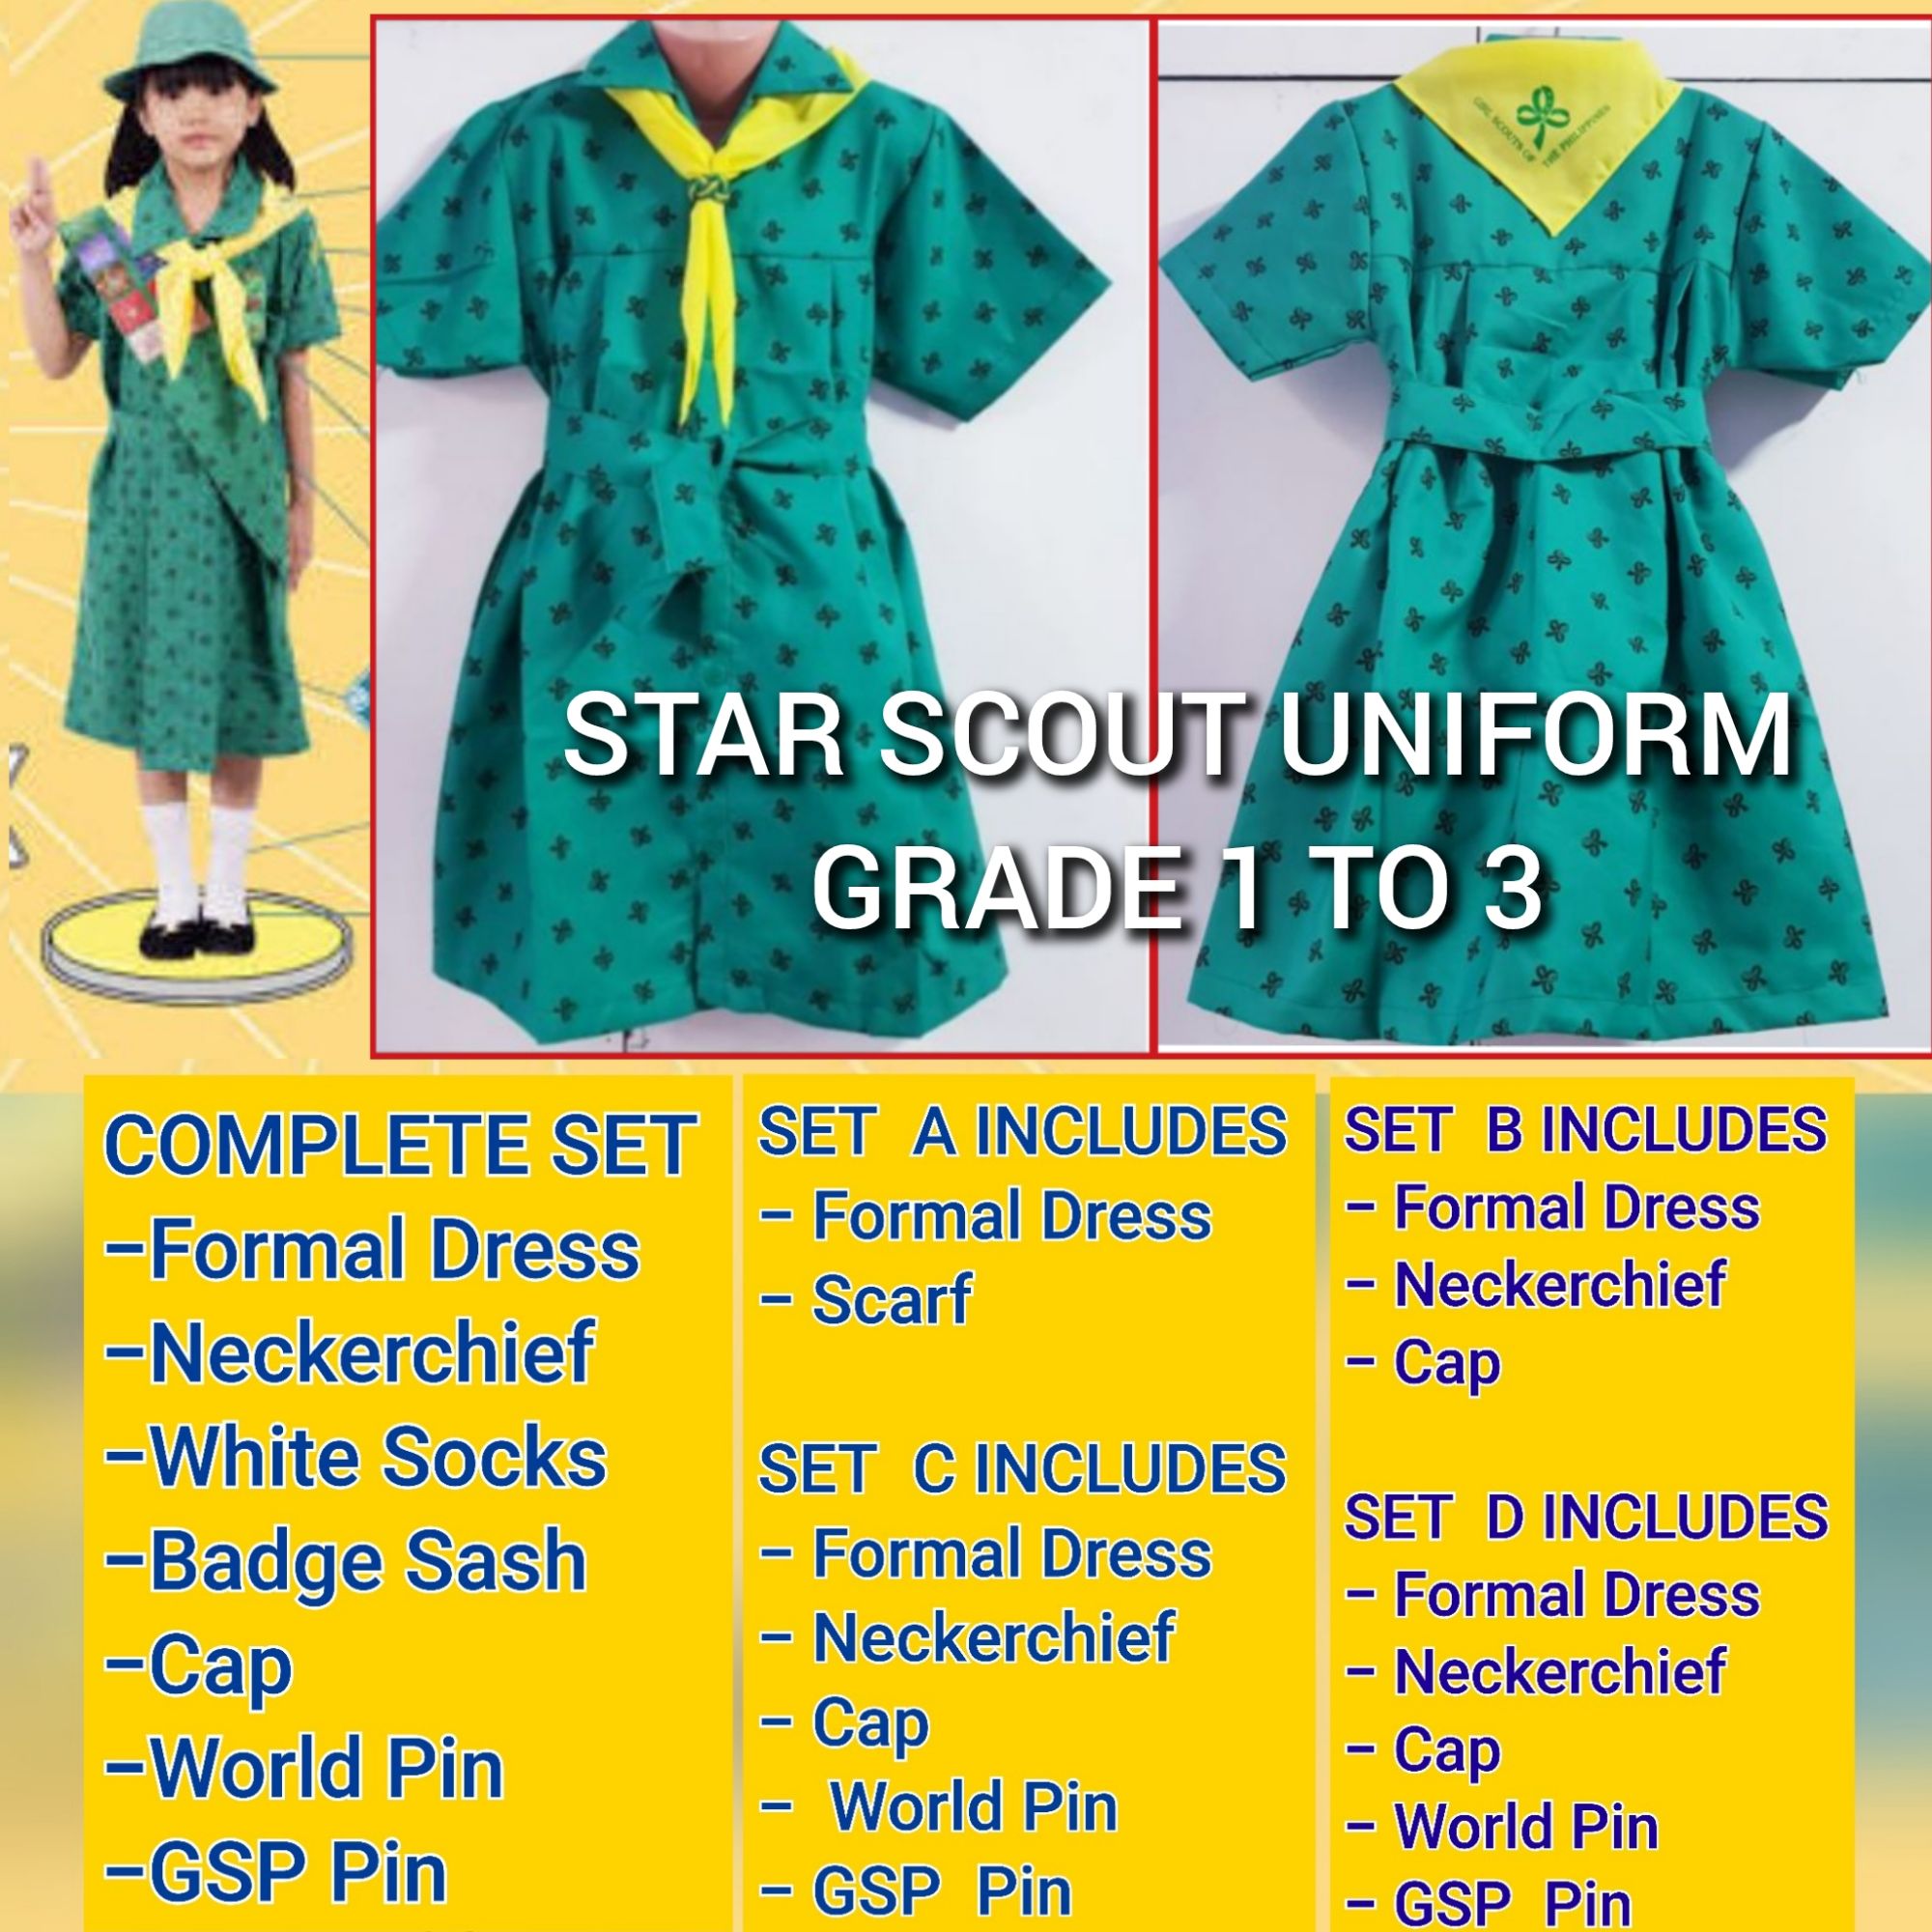 STAR SCOUT UNIFORM SET/GRADE 1 TO 3/GIRL SCOUT/TYPE A/FORMAL DRESS